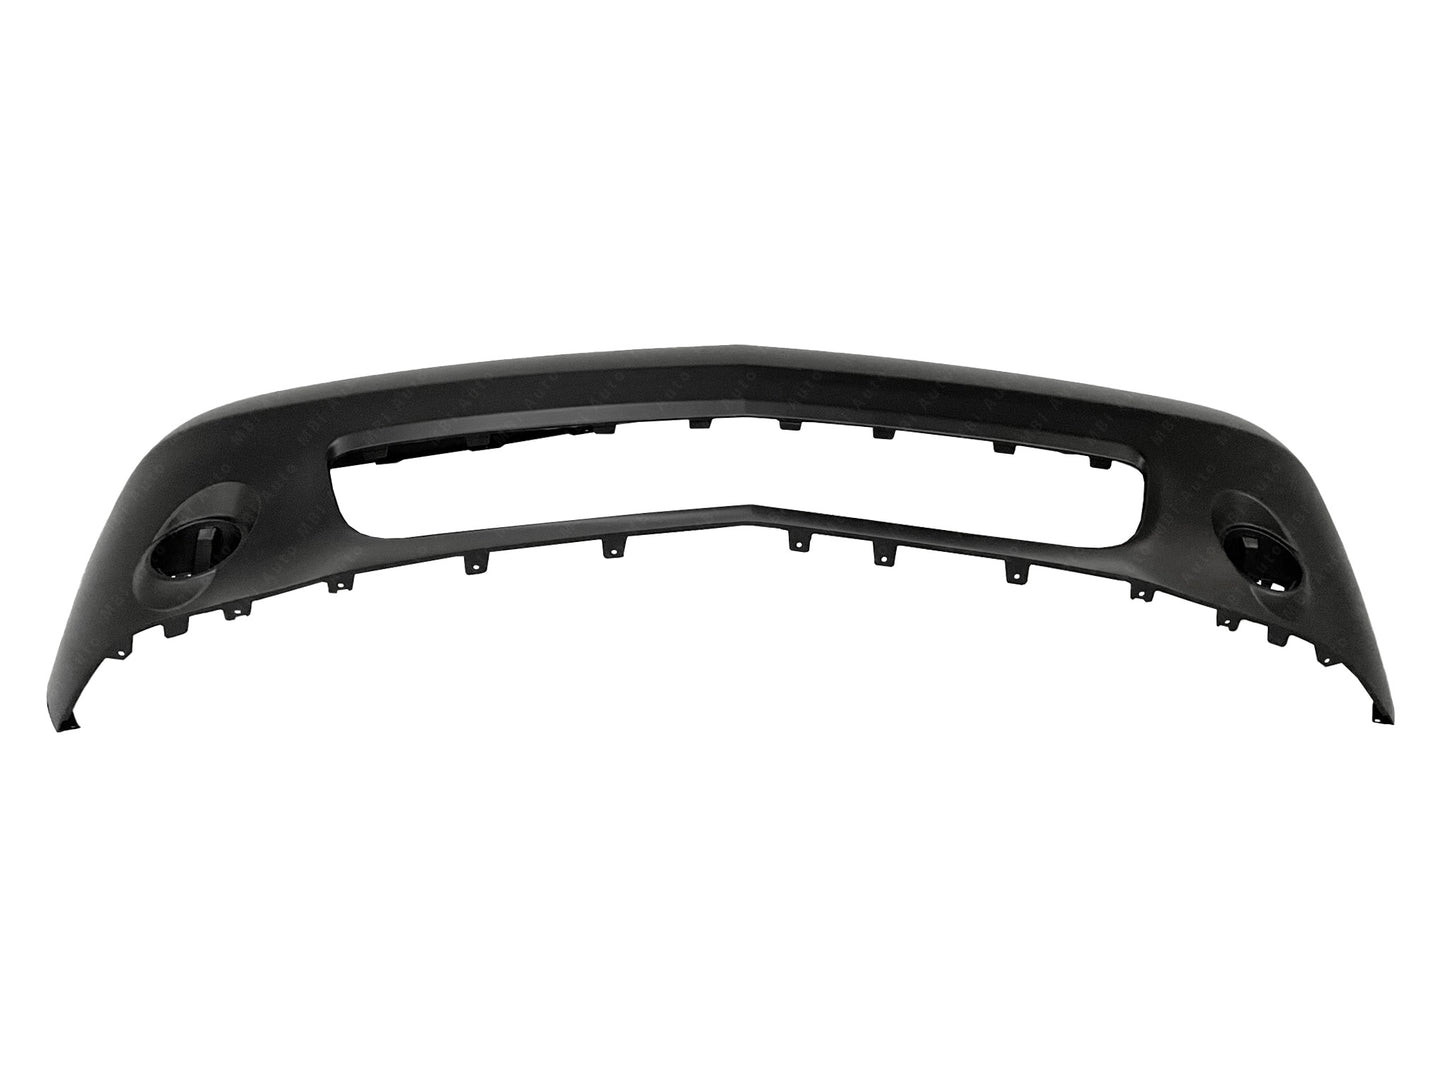 Dodge Challenger 2015 - 2023 Front Bumper Cover 15 - 23 CH1000A20 Bumper-King